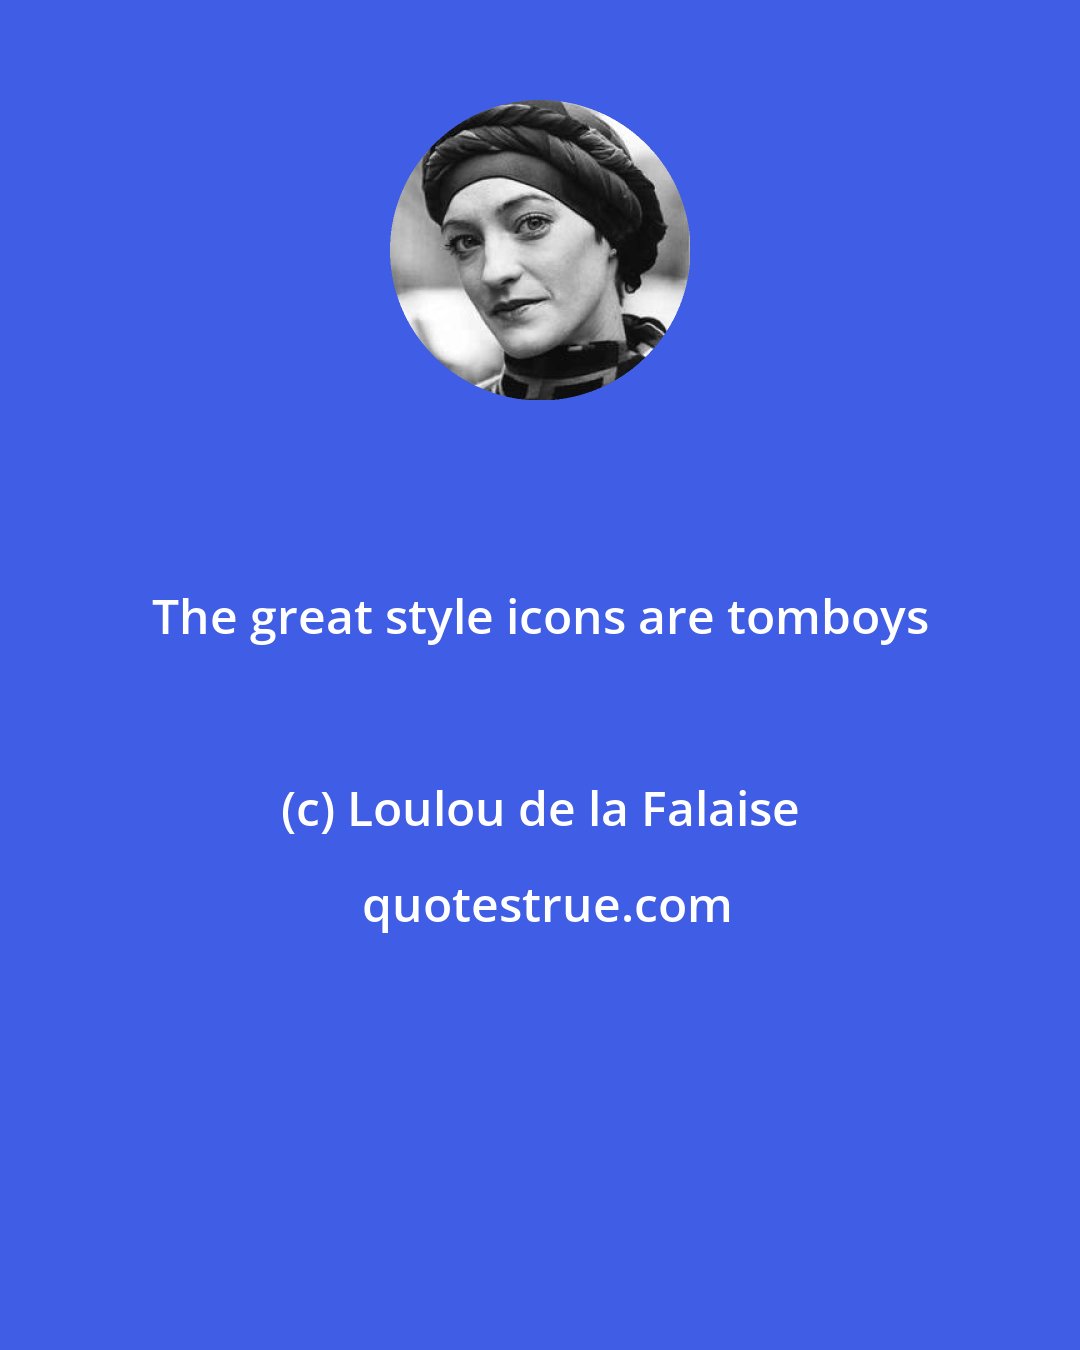 Loulou de la Falaise: The great style icons are tomboys